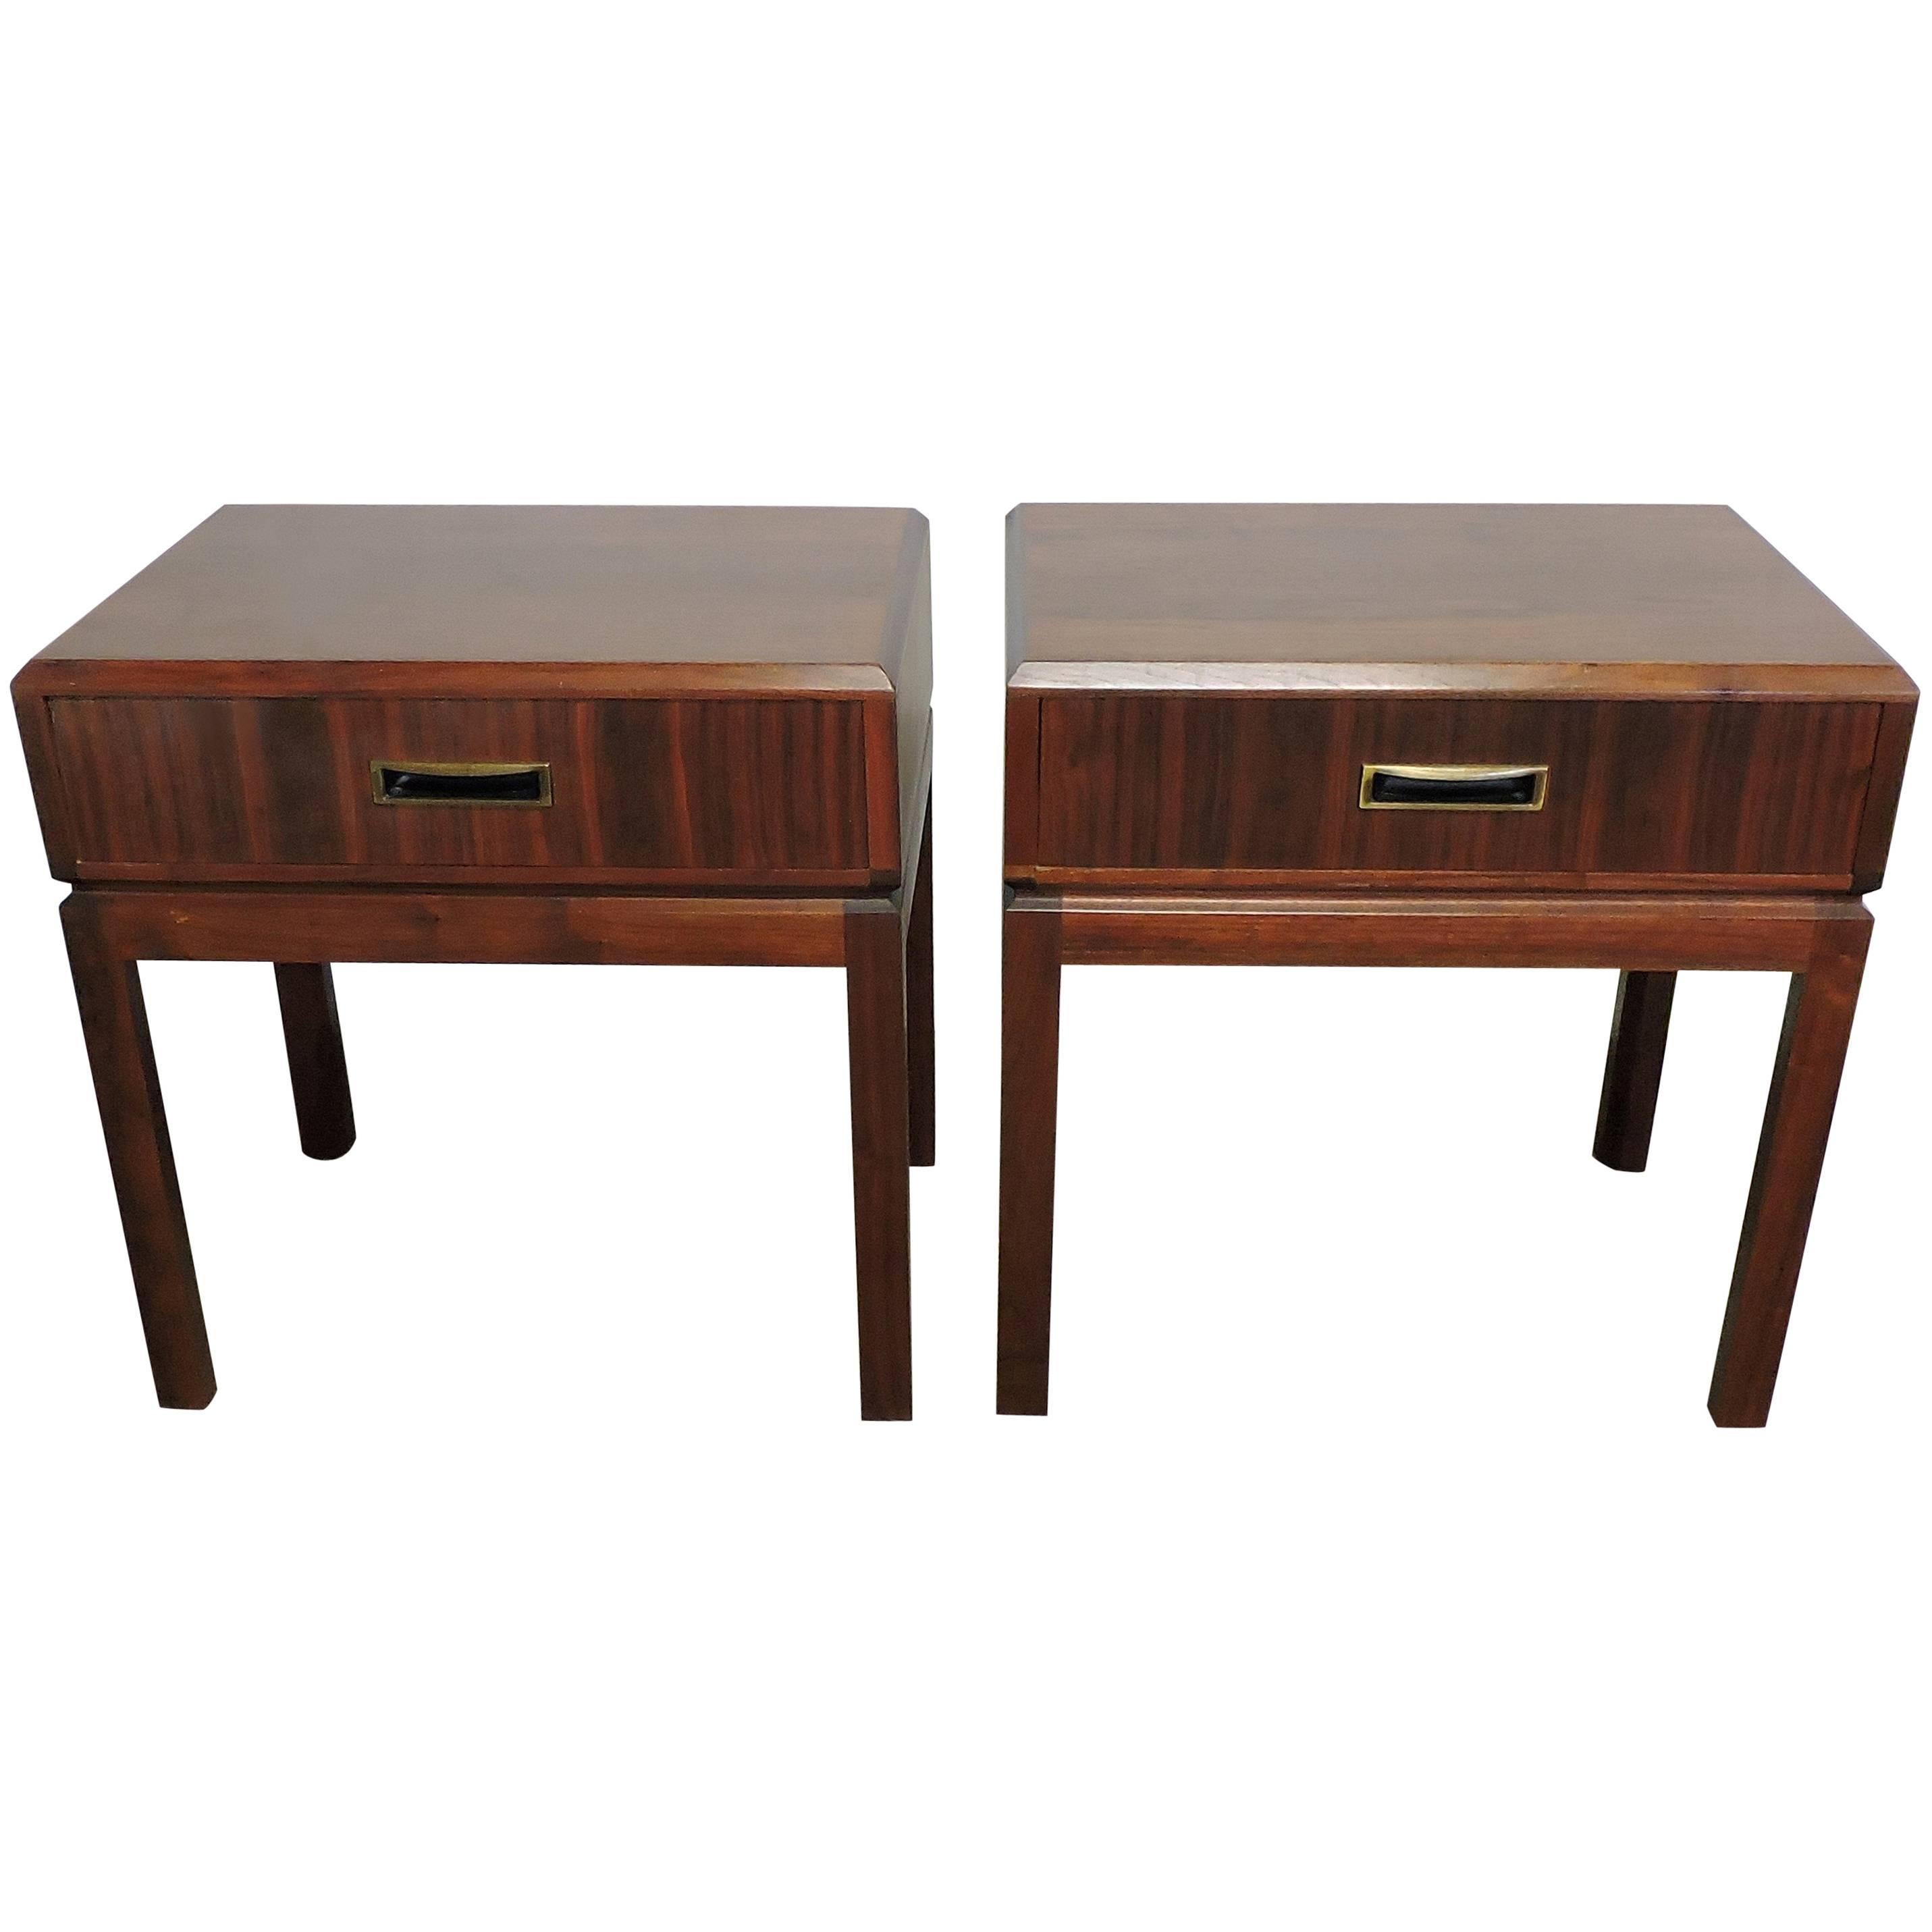 Pair of Founders Mid-Century Modern Walnut Nightstands or End Tables 